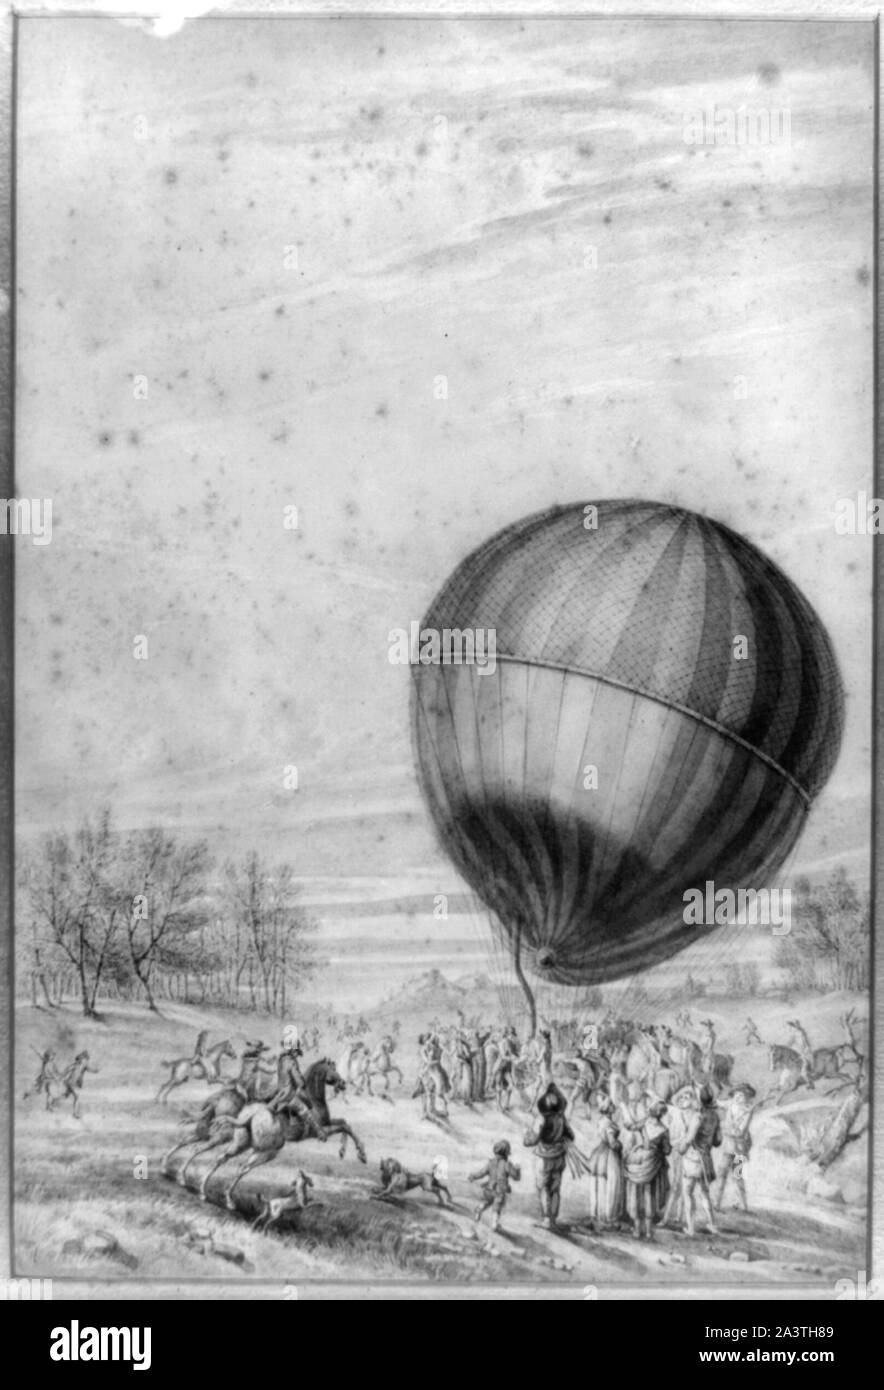 The  'Aerostatic globe' balloon, belonging to Jacques Charles and Marie-Noel Robert, descending on the plain of Nesle, near Beaumont, France Drawing shows descent of the first manned hydrogen gas balloon flight, which departed from Paris, France on Dec. 1, 1783. Among the spectators in left foreground are the Duke de Chartres and the Duke de Fitz-James. Stock Photo